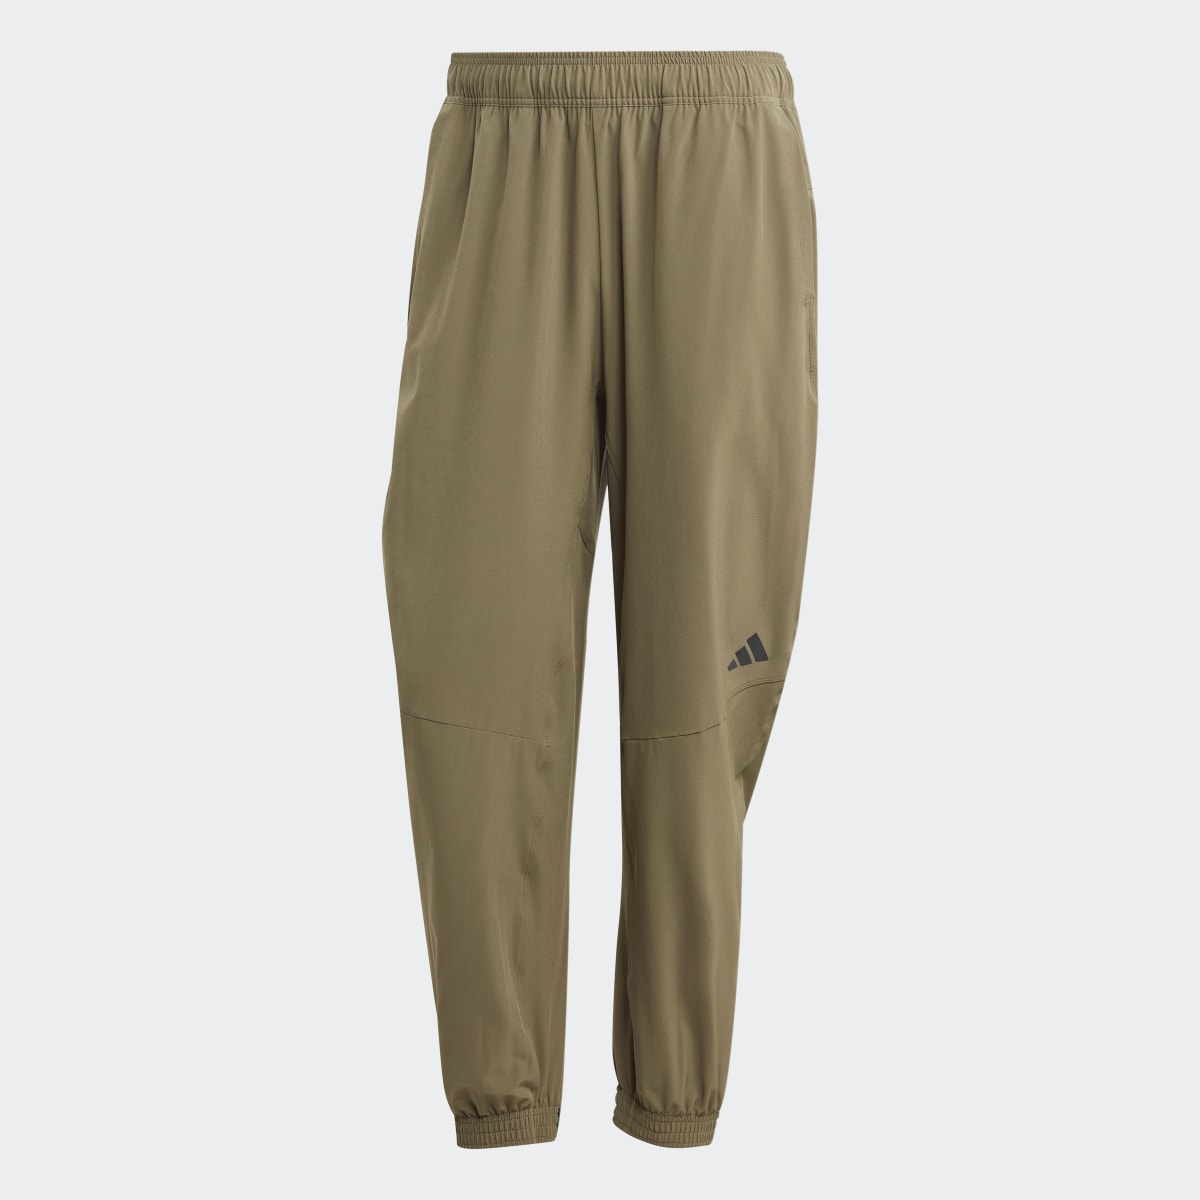 Adidas Designed for Training Pro Series Strength Pants. 5